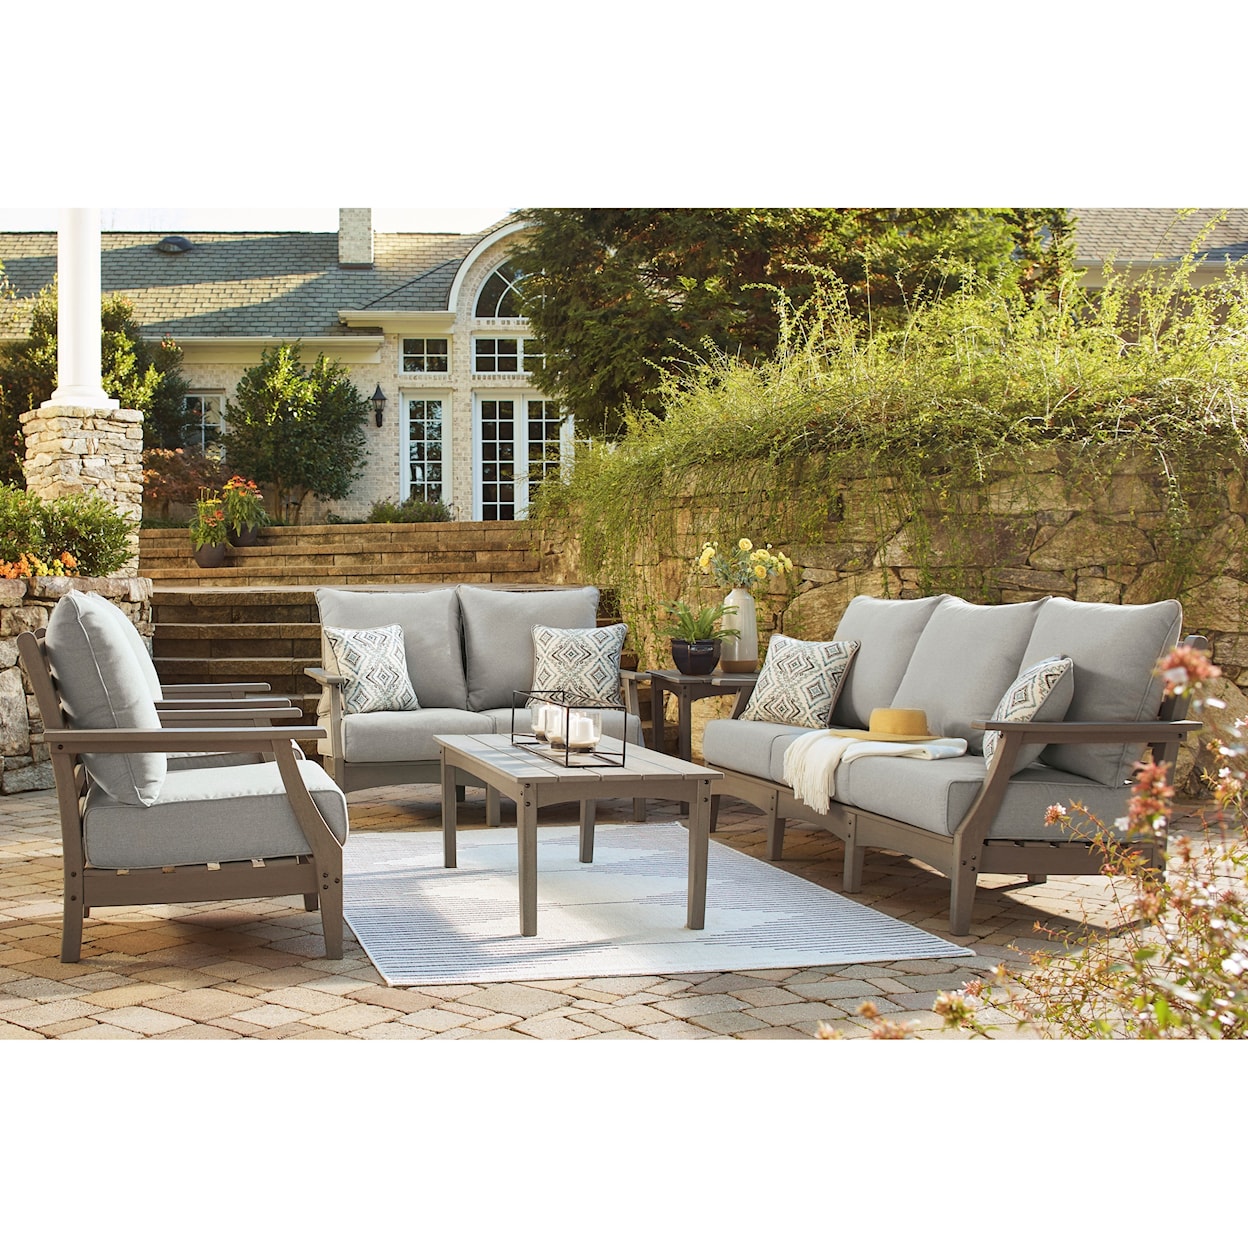 Signature Design by Ashley Visola Outdoor Sofa, Loveseat, Chairs, & Table Set